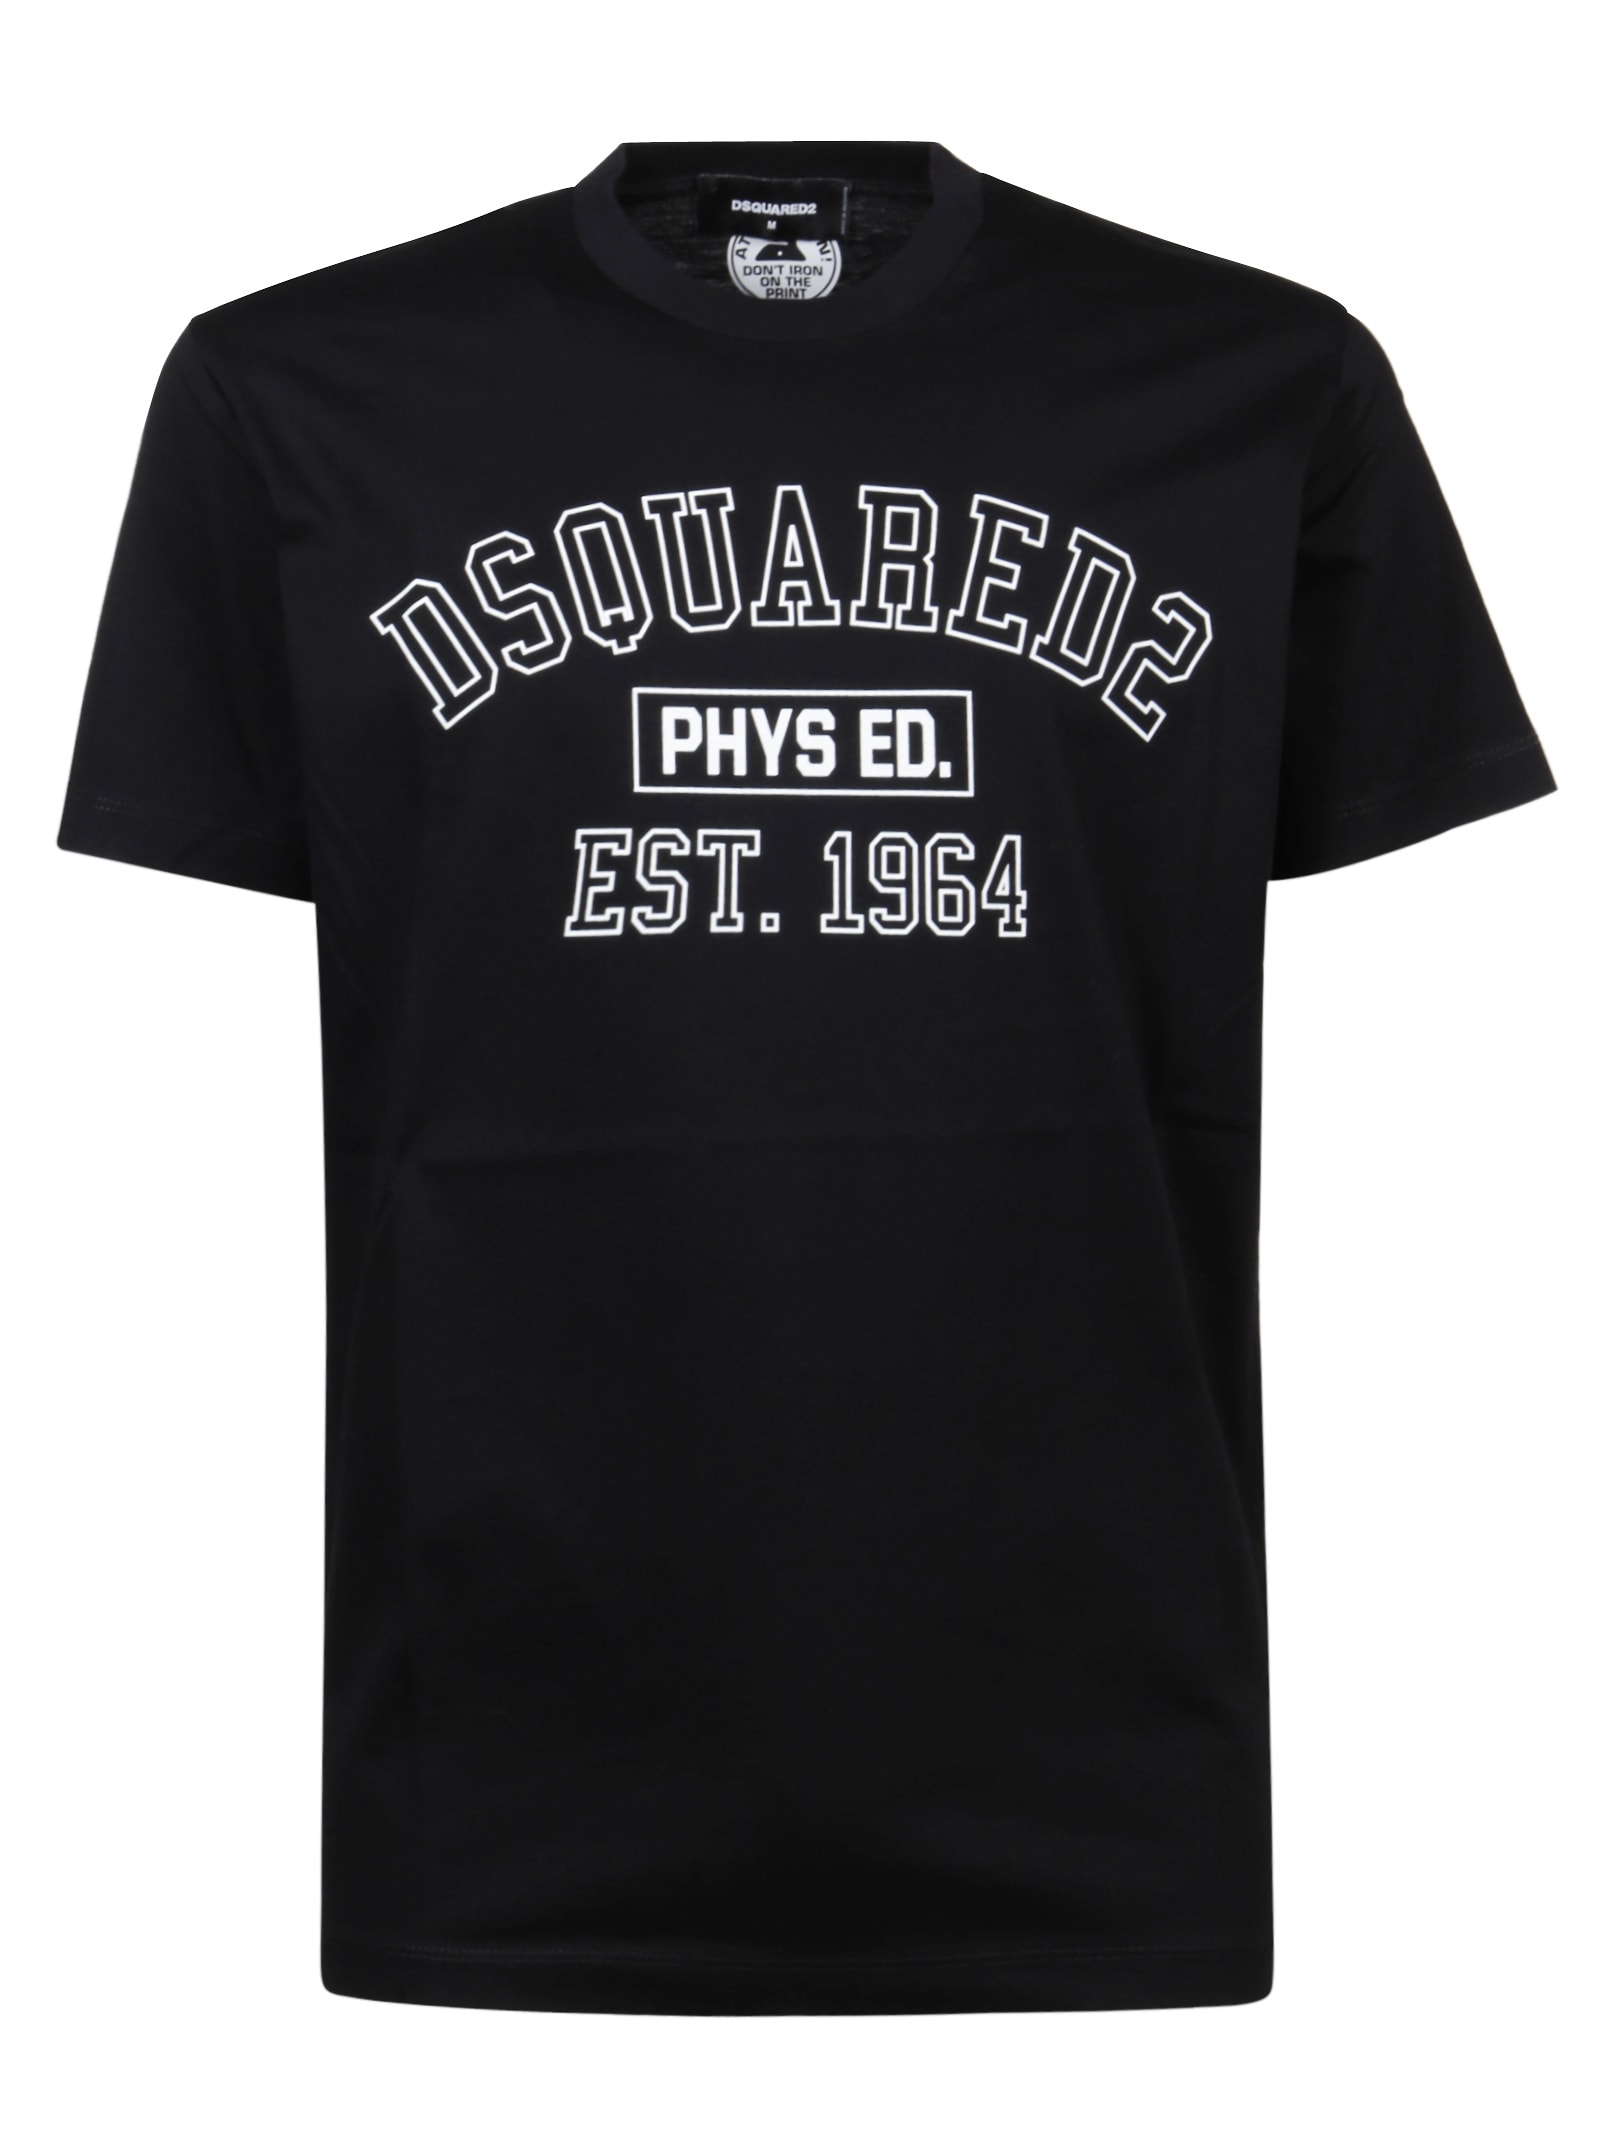 Dsquared2 D2 Phys Ed. Cool T-shirt